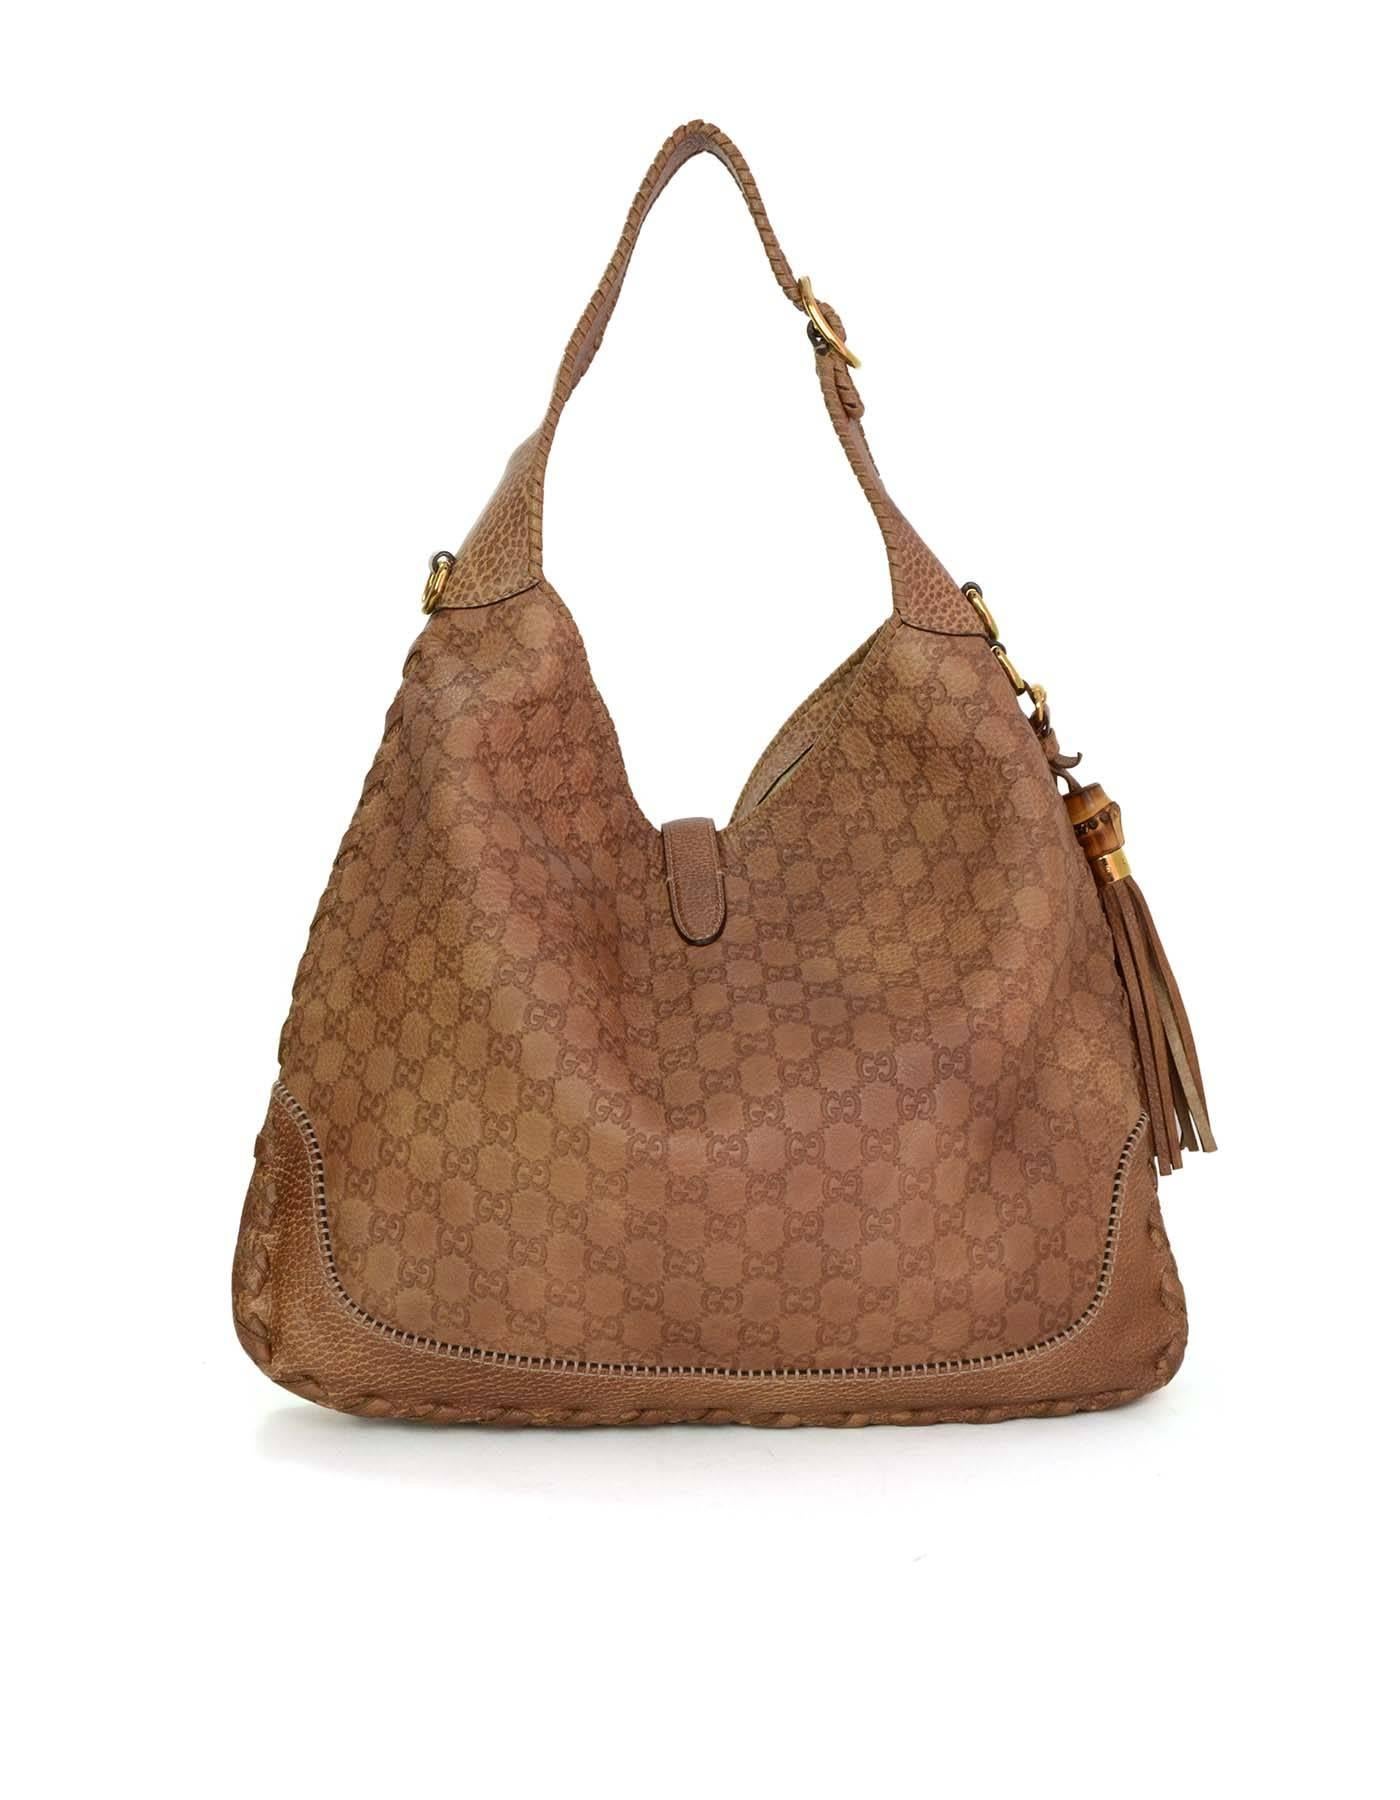 Gucci Tan Gucissima Large New Jackie Shoulder Bag 
Features optional longer crossbody strap and bamboo details at hardware
Made In: Italy
Color: Tan
Hardware: Goldtone
Materials: Leather
Lining: Beige canvas
Closure/Opening: Open top with